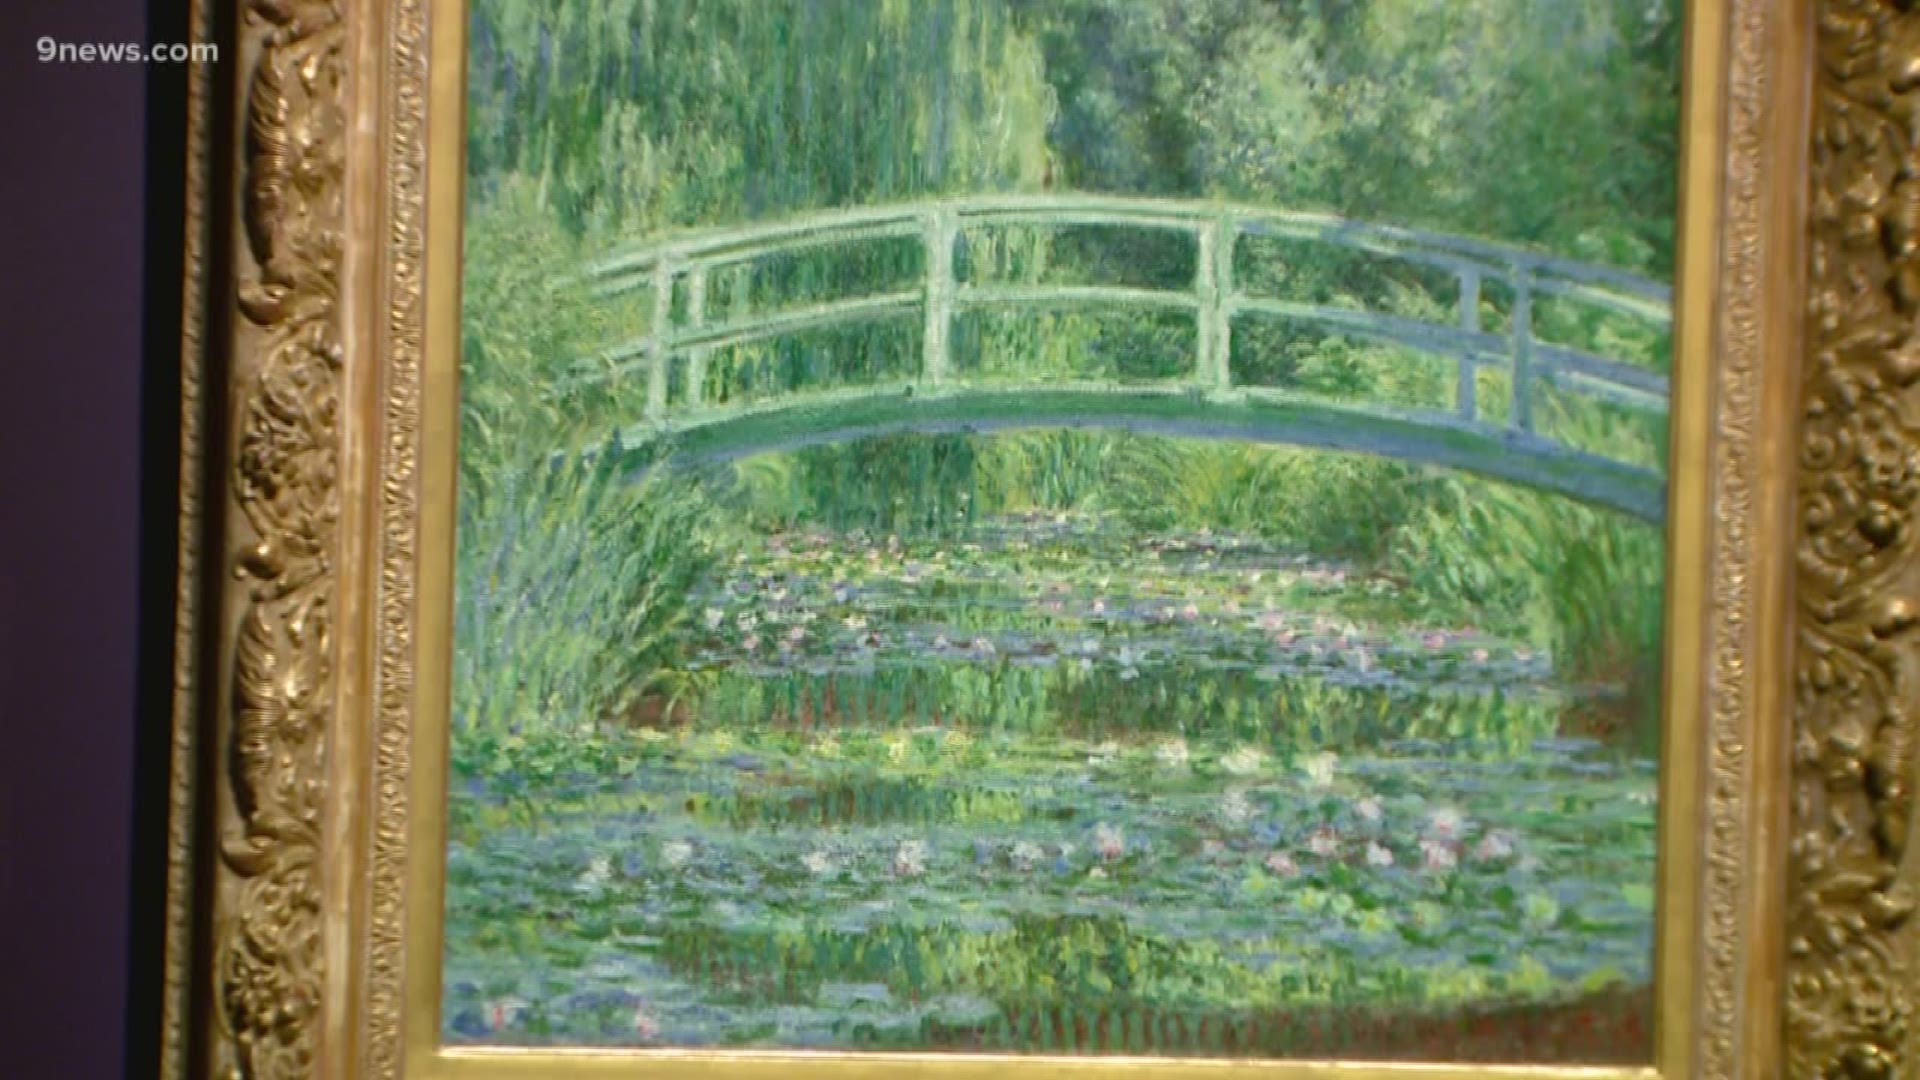 "Claude Monet: The Truth of Nature" was open Oct. 21, 2019 through Feb. 2, 2020.